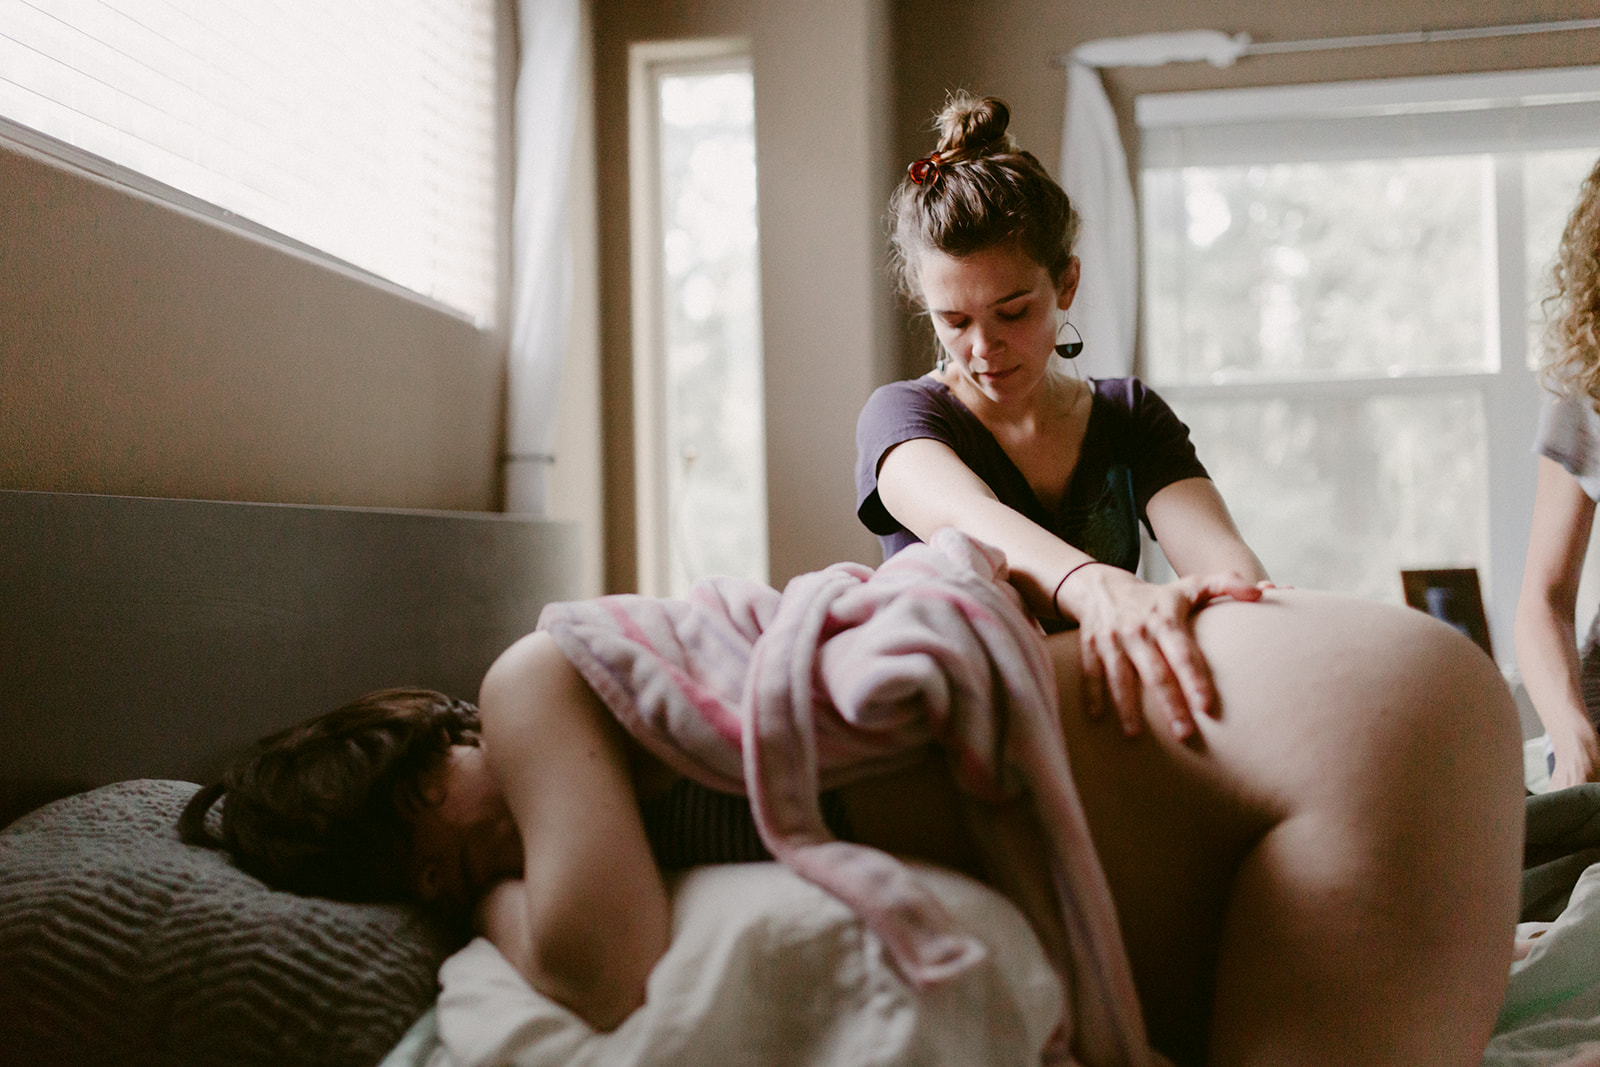 Midwife Lucy French applies pressure and massage during a home birth.